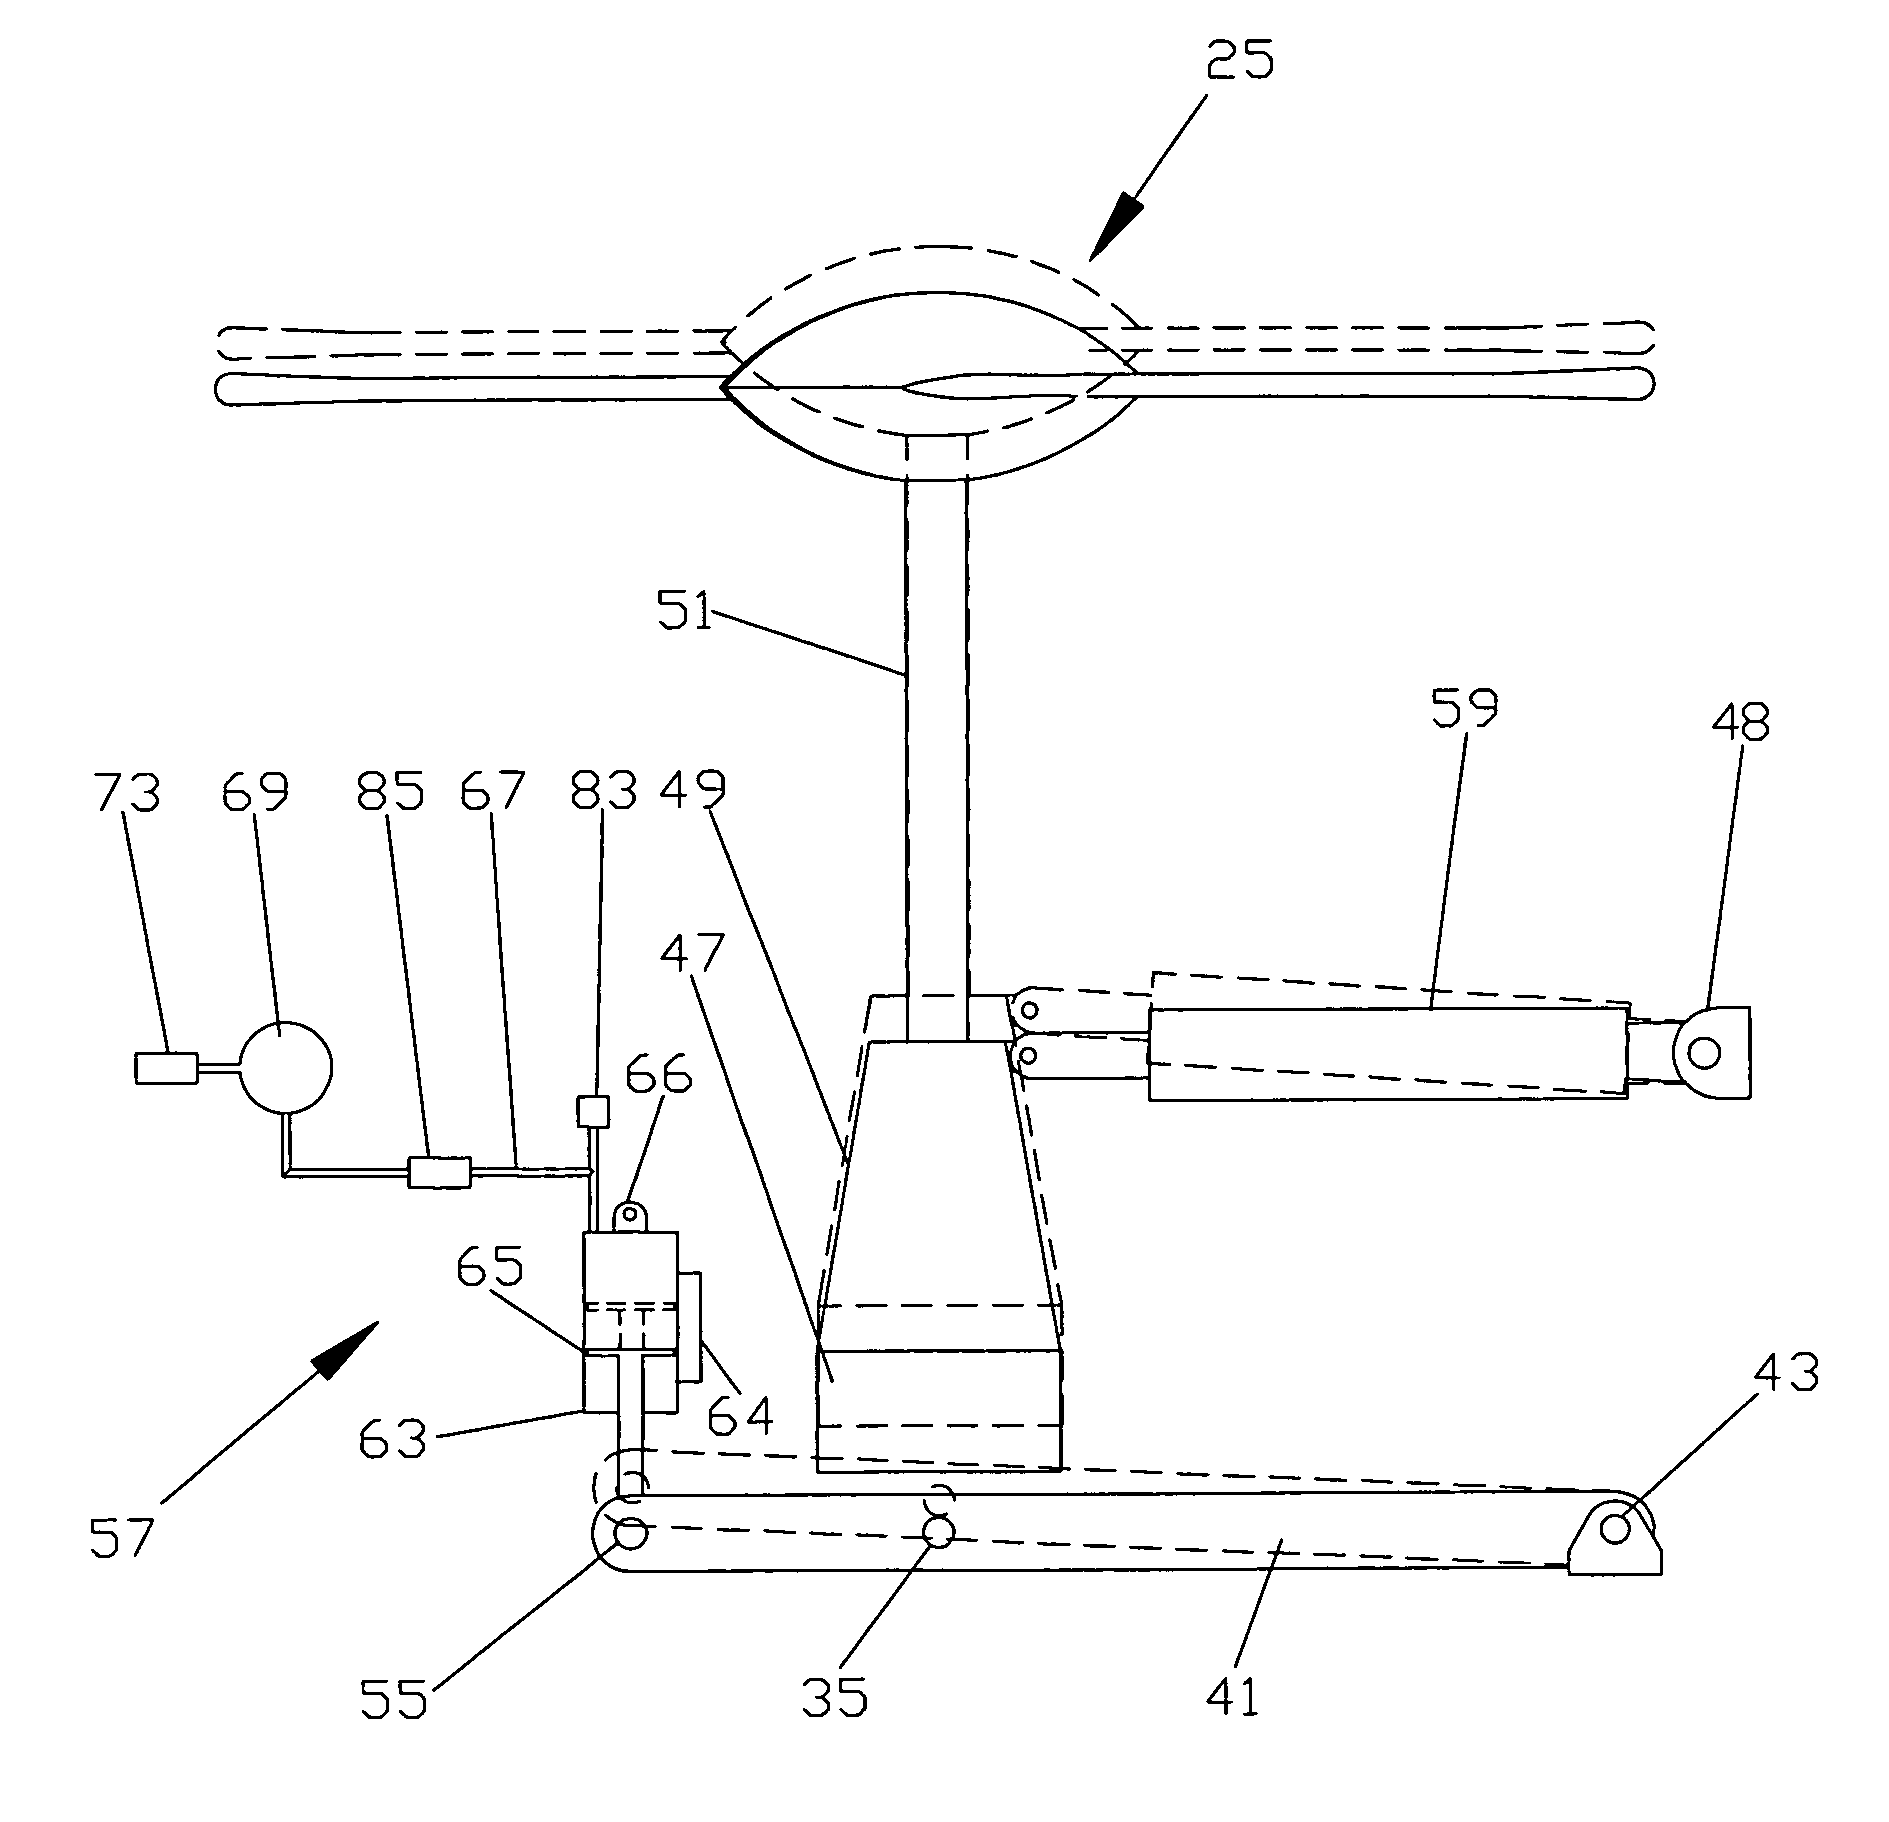 Aircraft with rotor vibration isolation